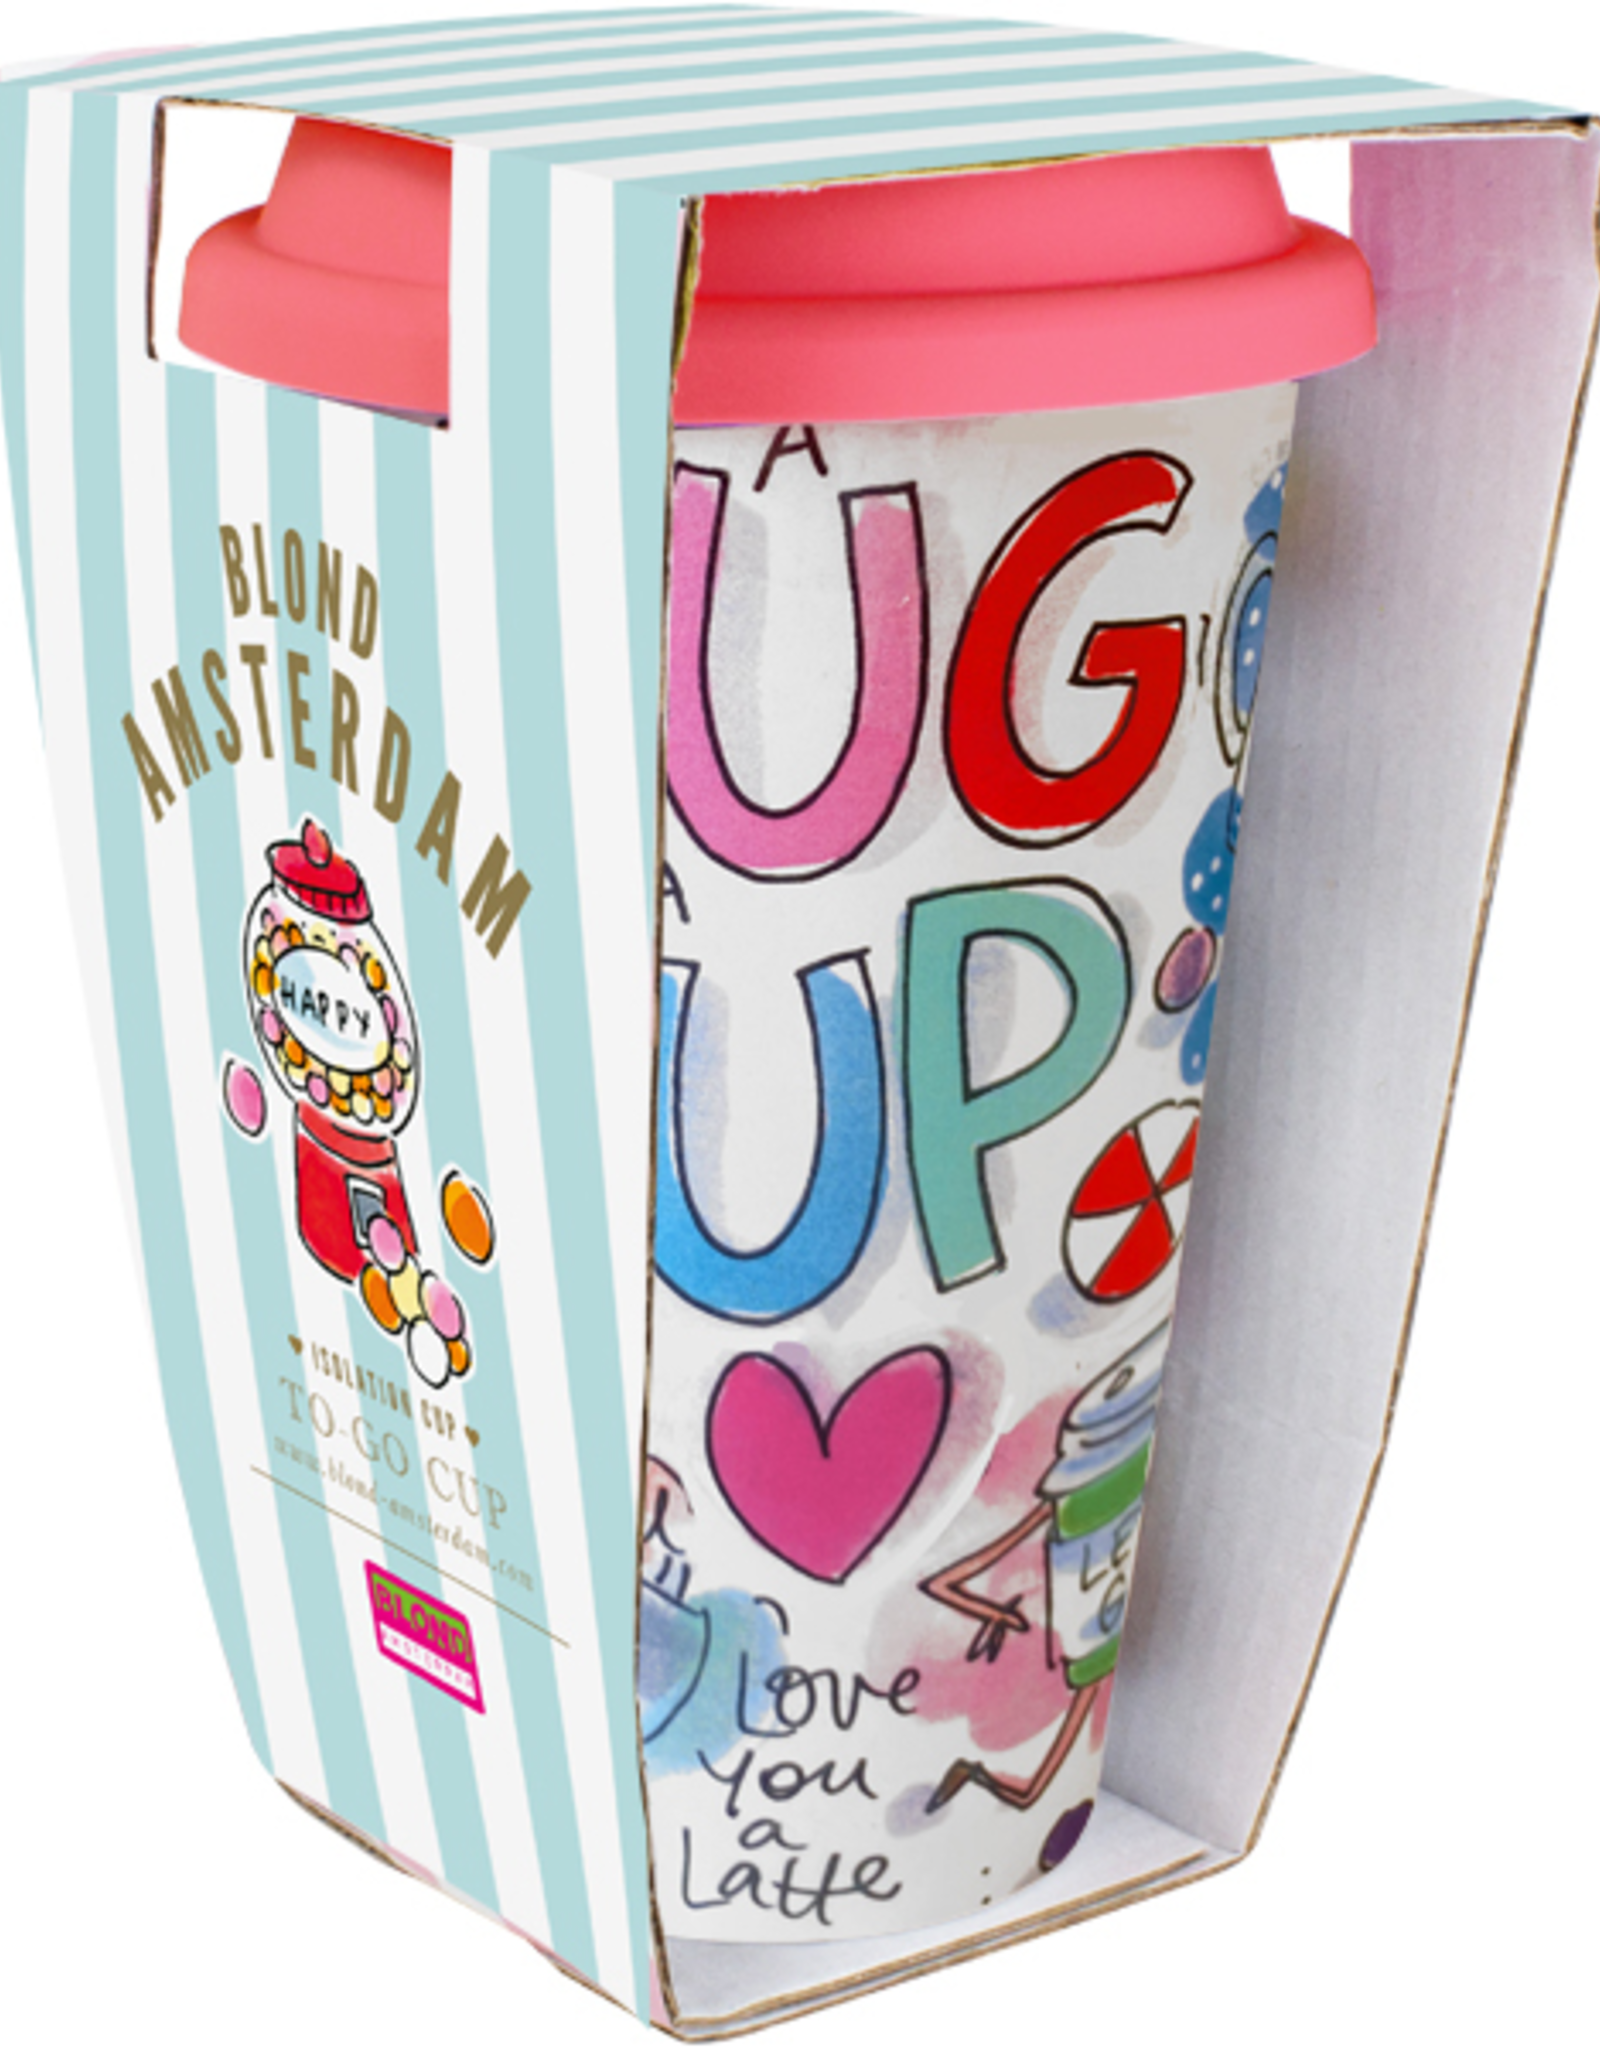 Blond Amsterdam To Go Cup "Hug in a Cup" - Blond Amsterdam